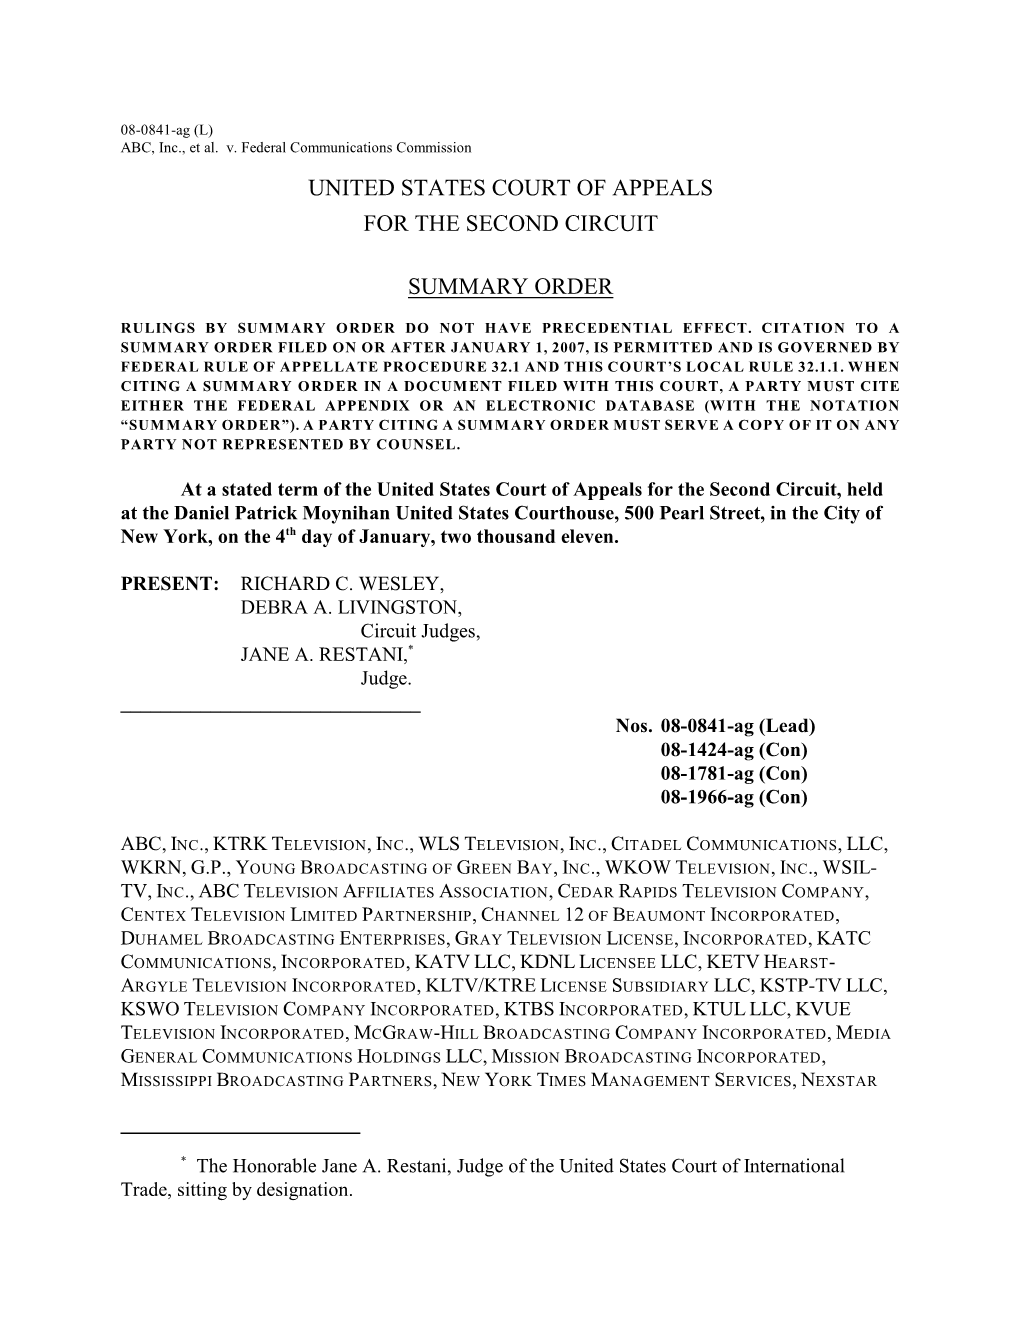 United States Court of Appeals for the Second Circuit